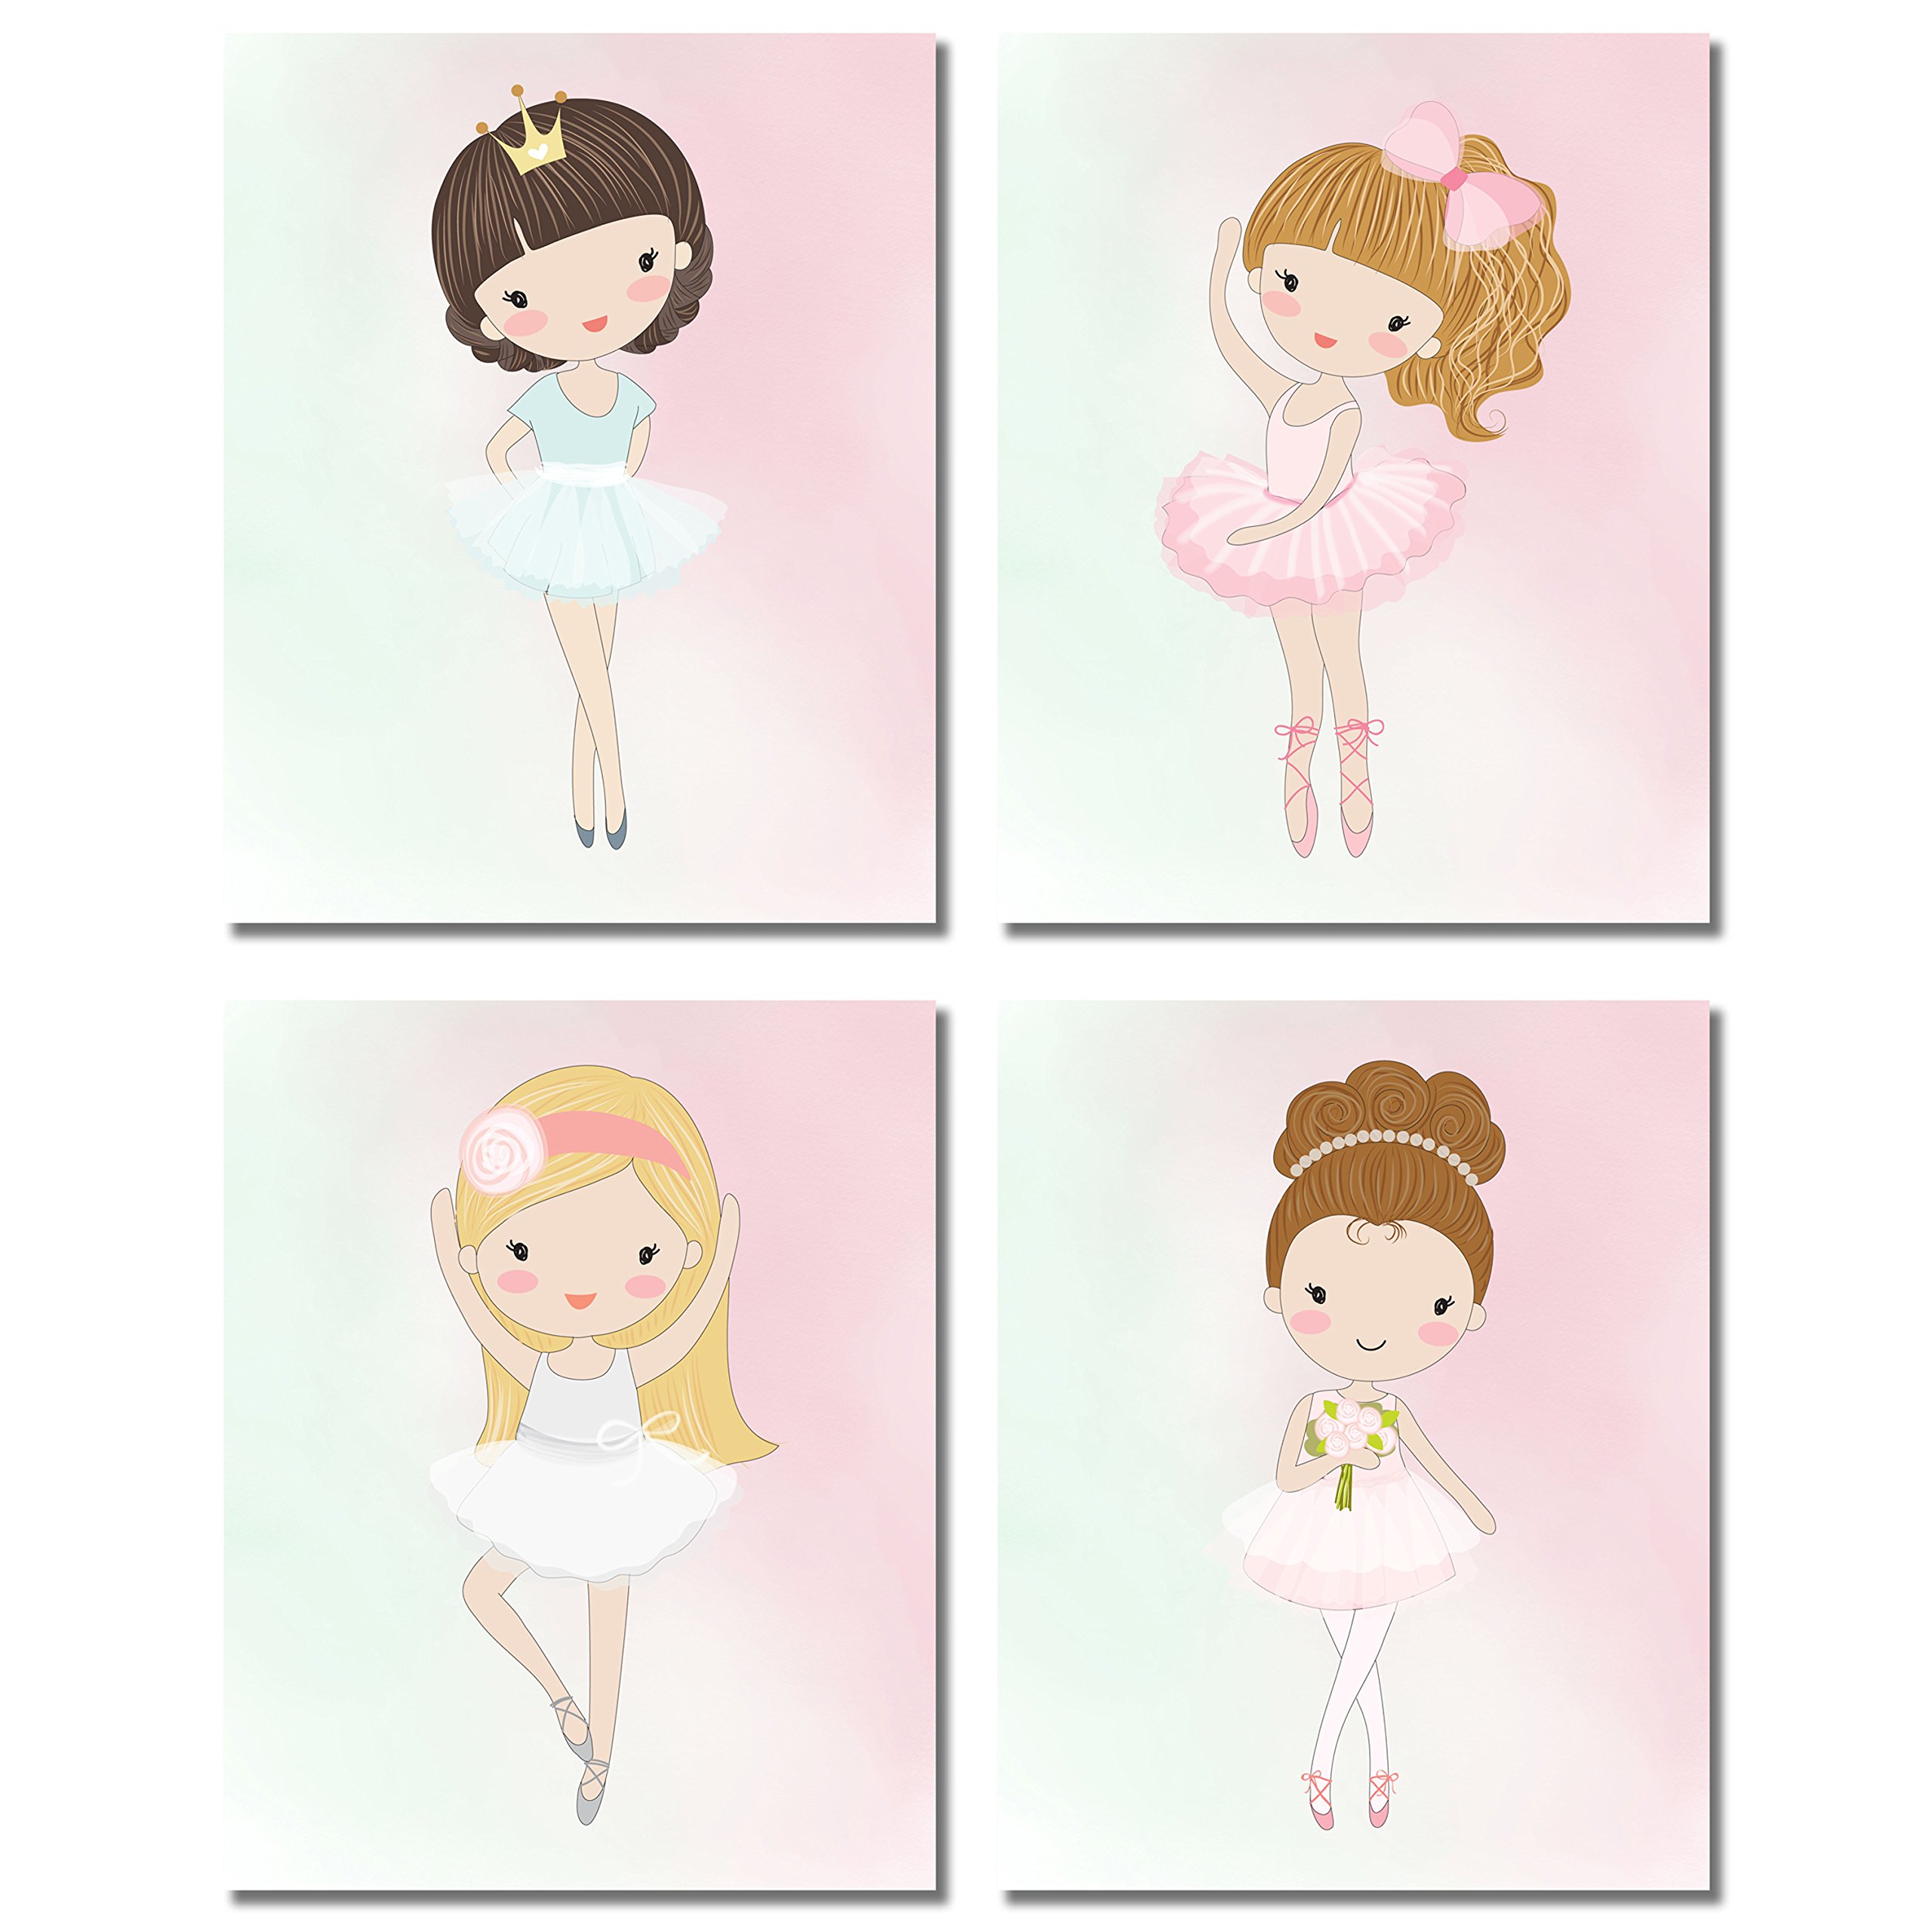 Book Cover Cute Ballerina Dancer Girl Prints - Bedroom Playroom Wall Art Decor Prints - Set of 4 (8 inches x 10 inches) Photos